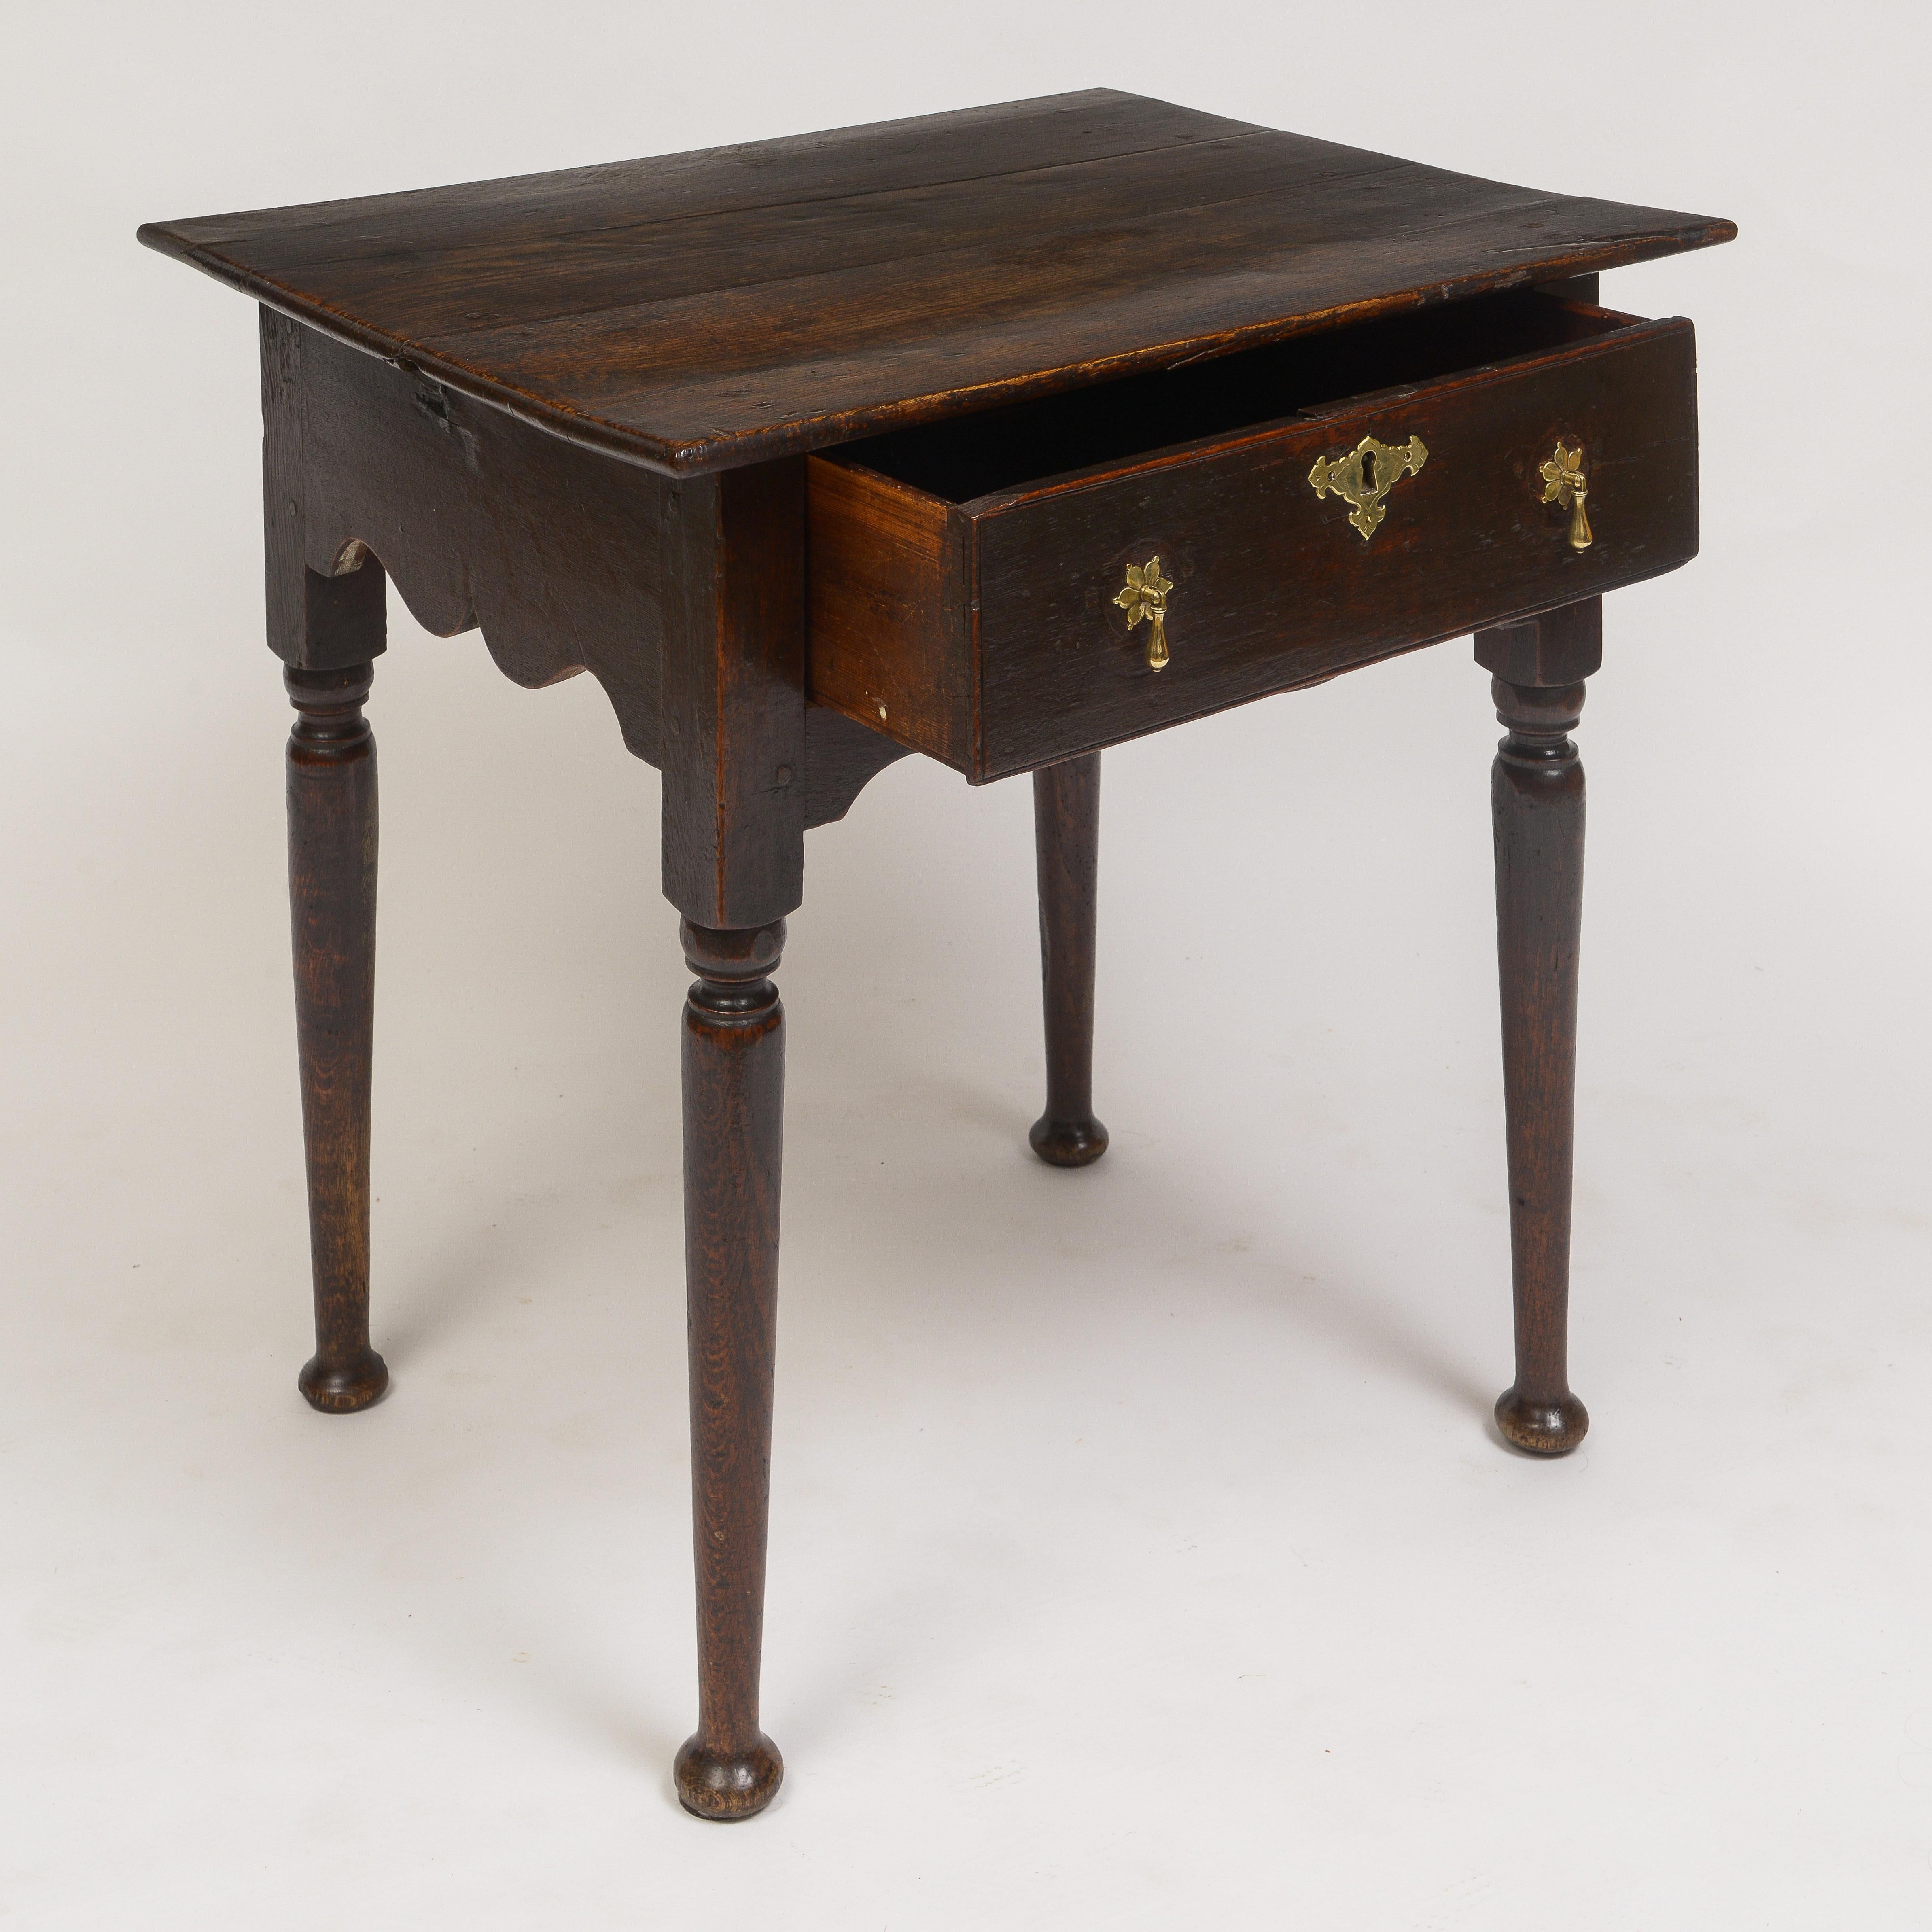 Over sized top over a single drawer with period brass hardware.
Carved plinth supported by turned legs ending in a pad foot.